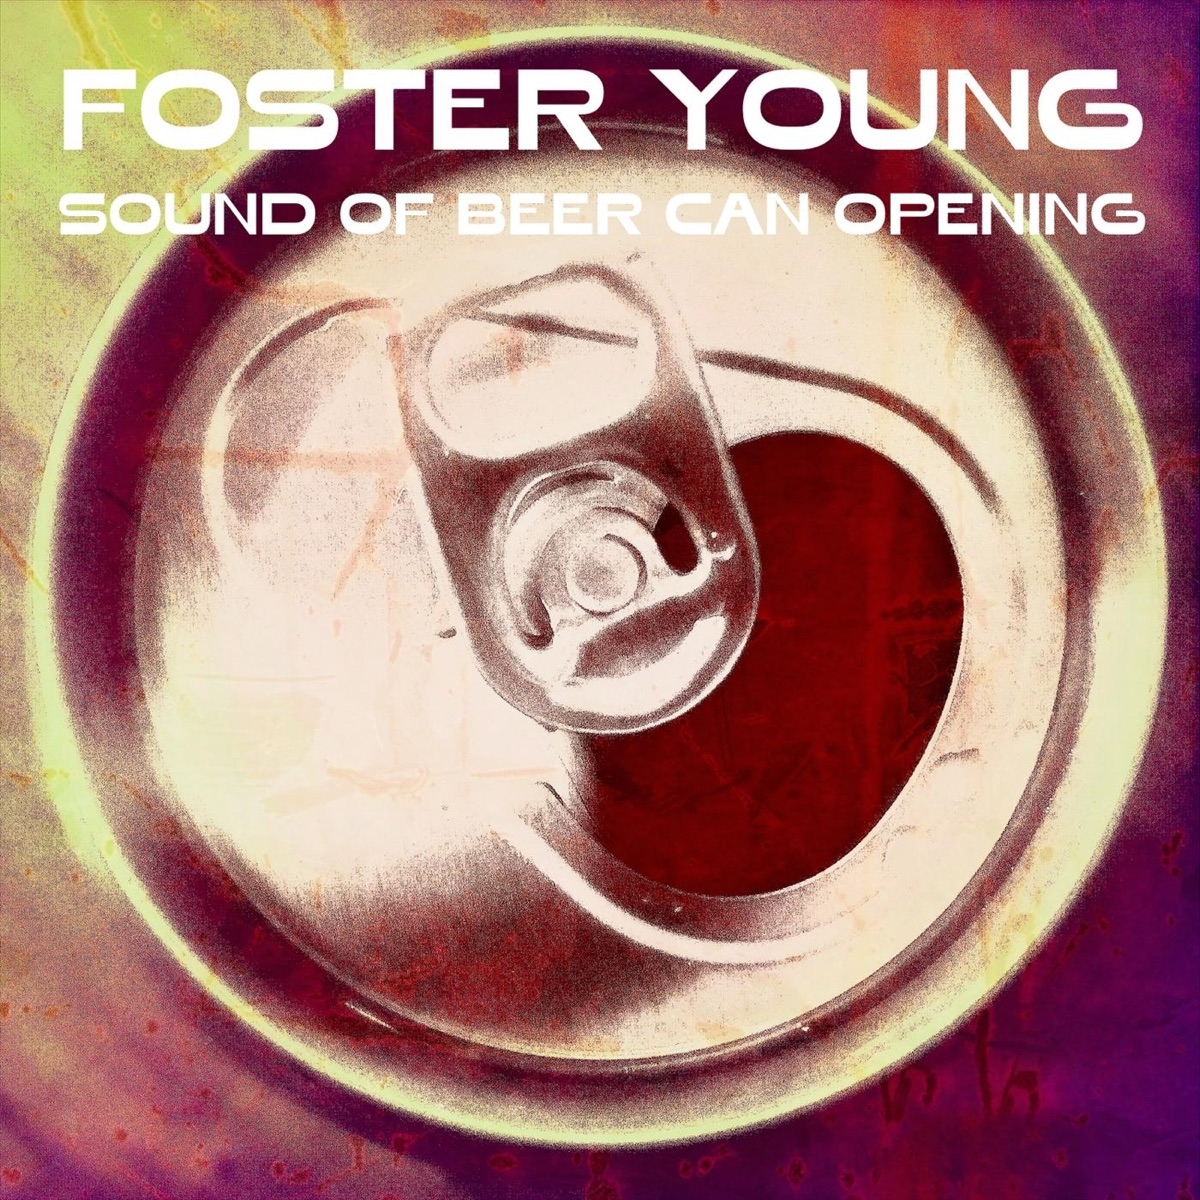 Sound of Beer Can Opening - Single - Album by Foster Young - Apple Music